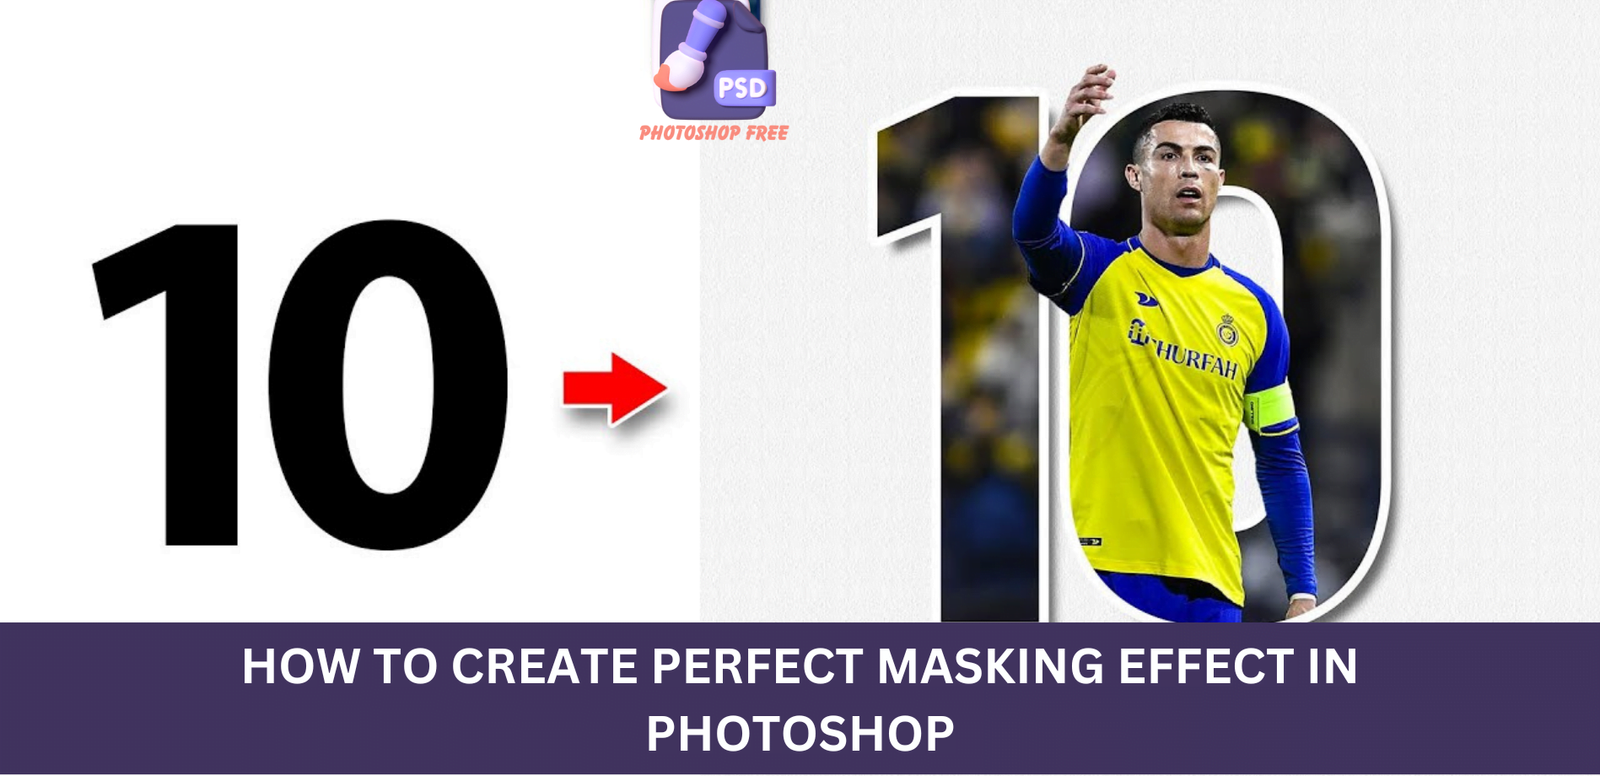 Perfect Masking Effect in Photoshop